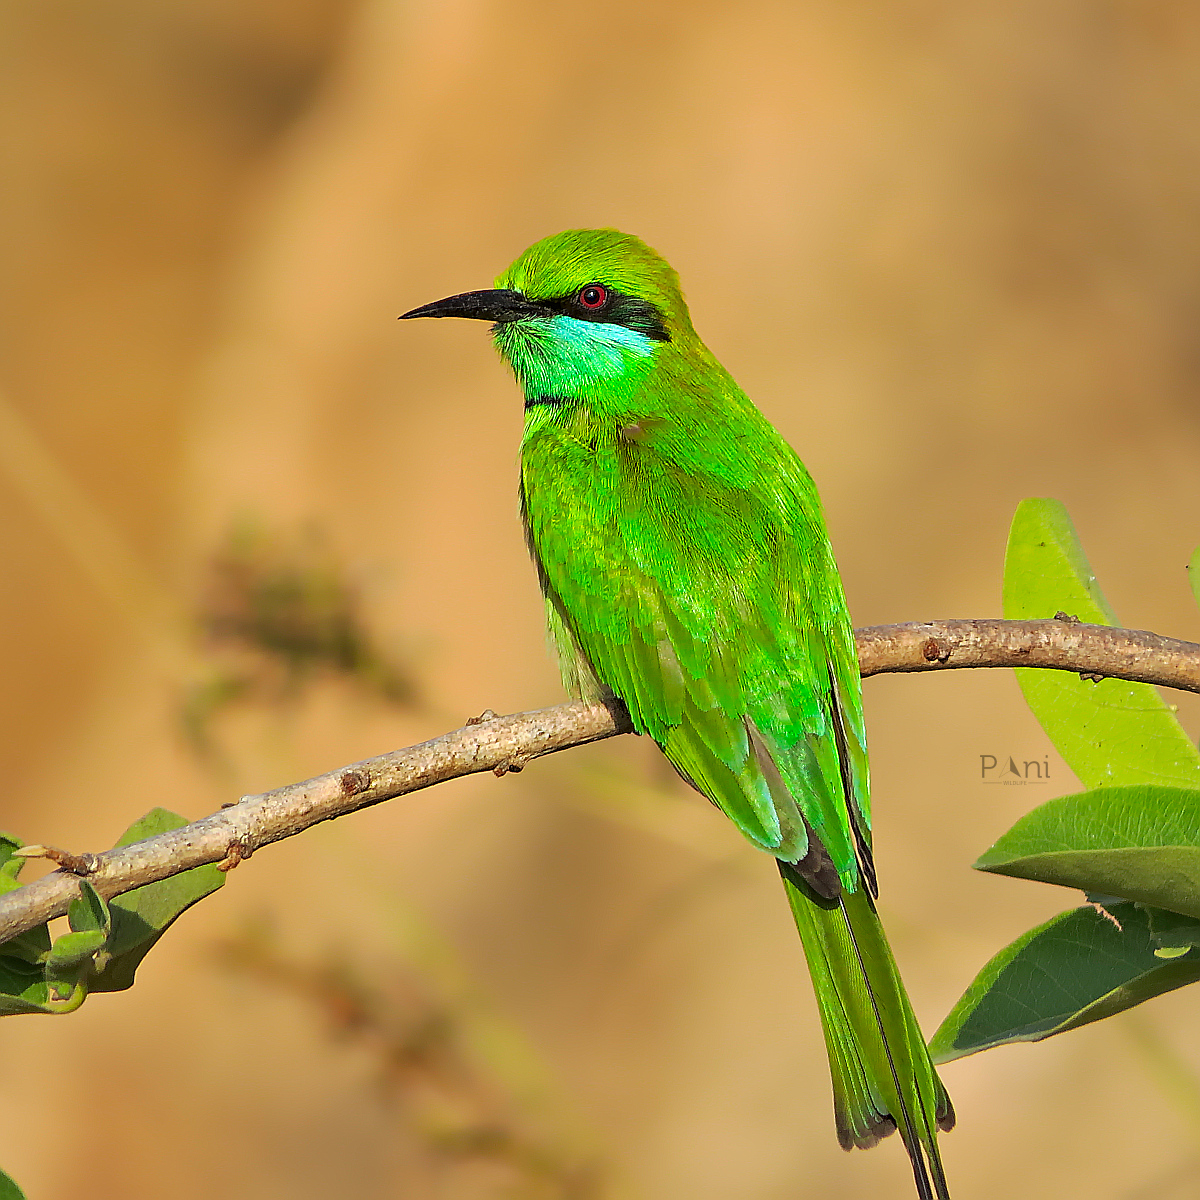 Green Bee Eater The Green Bee-eater has a remarkable vision, allowing them to spot tiny insects from considerable distances.They are intelligent birds and can be trained to distinguish between different colors and shapes. @IndiAves @Avibase